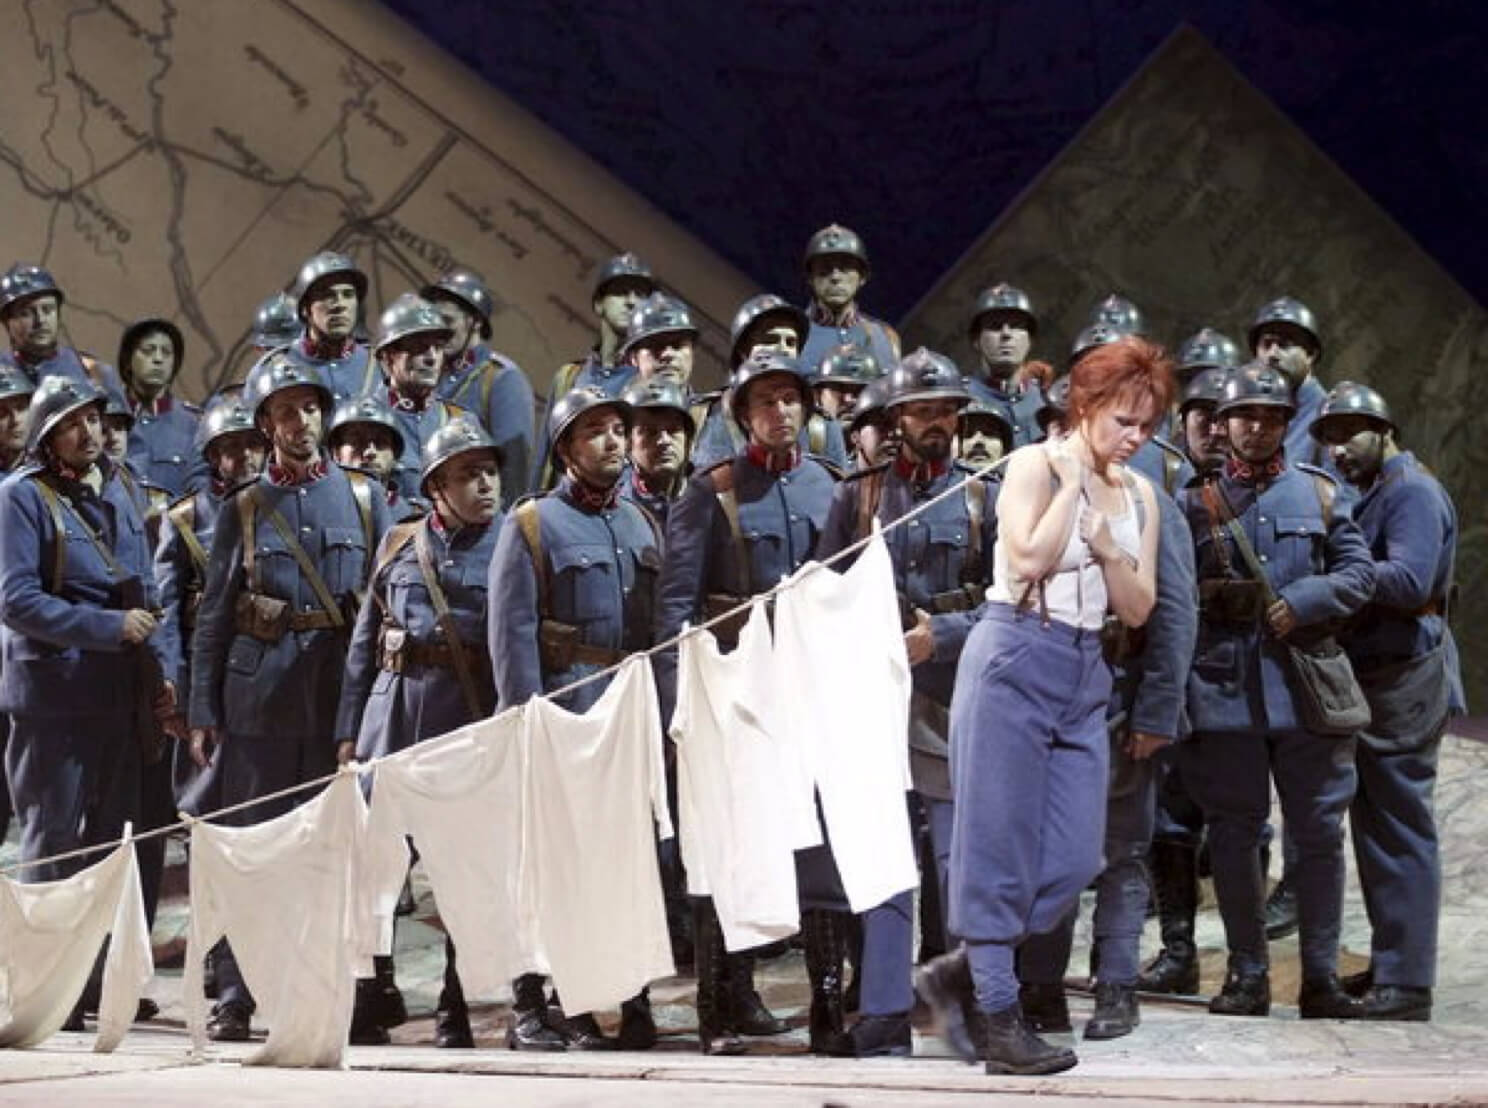 04. Comic Opera “The Daughter of the Regiment” by Donizetti. (2010) Photo: EFE/Javier at the Real 